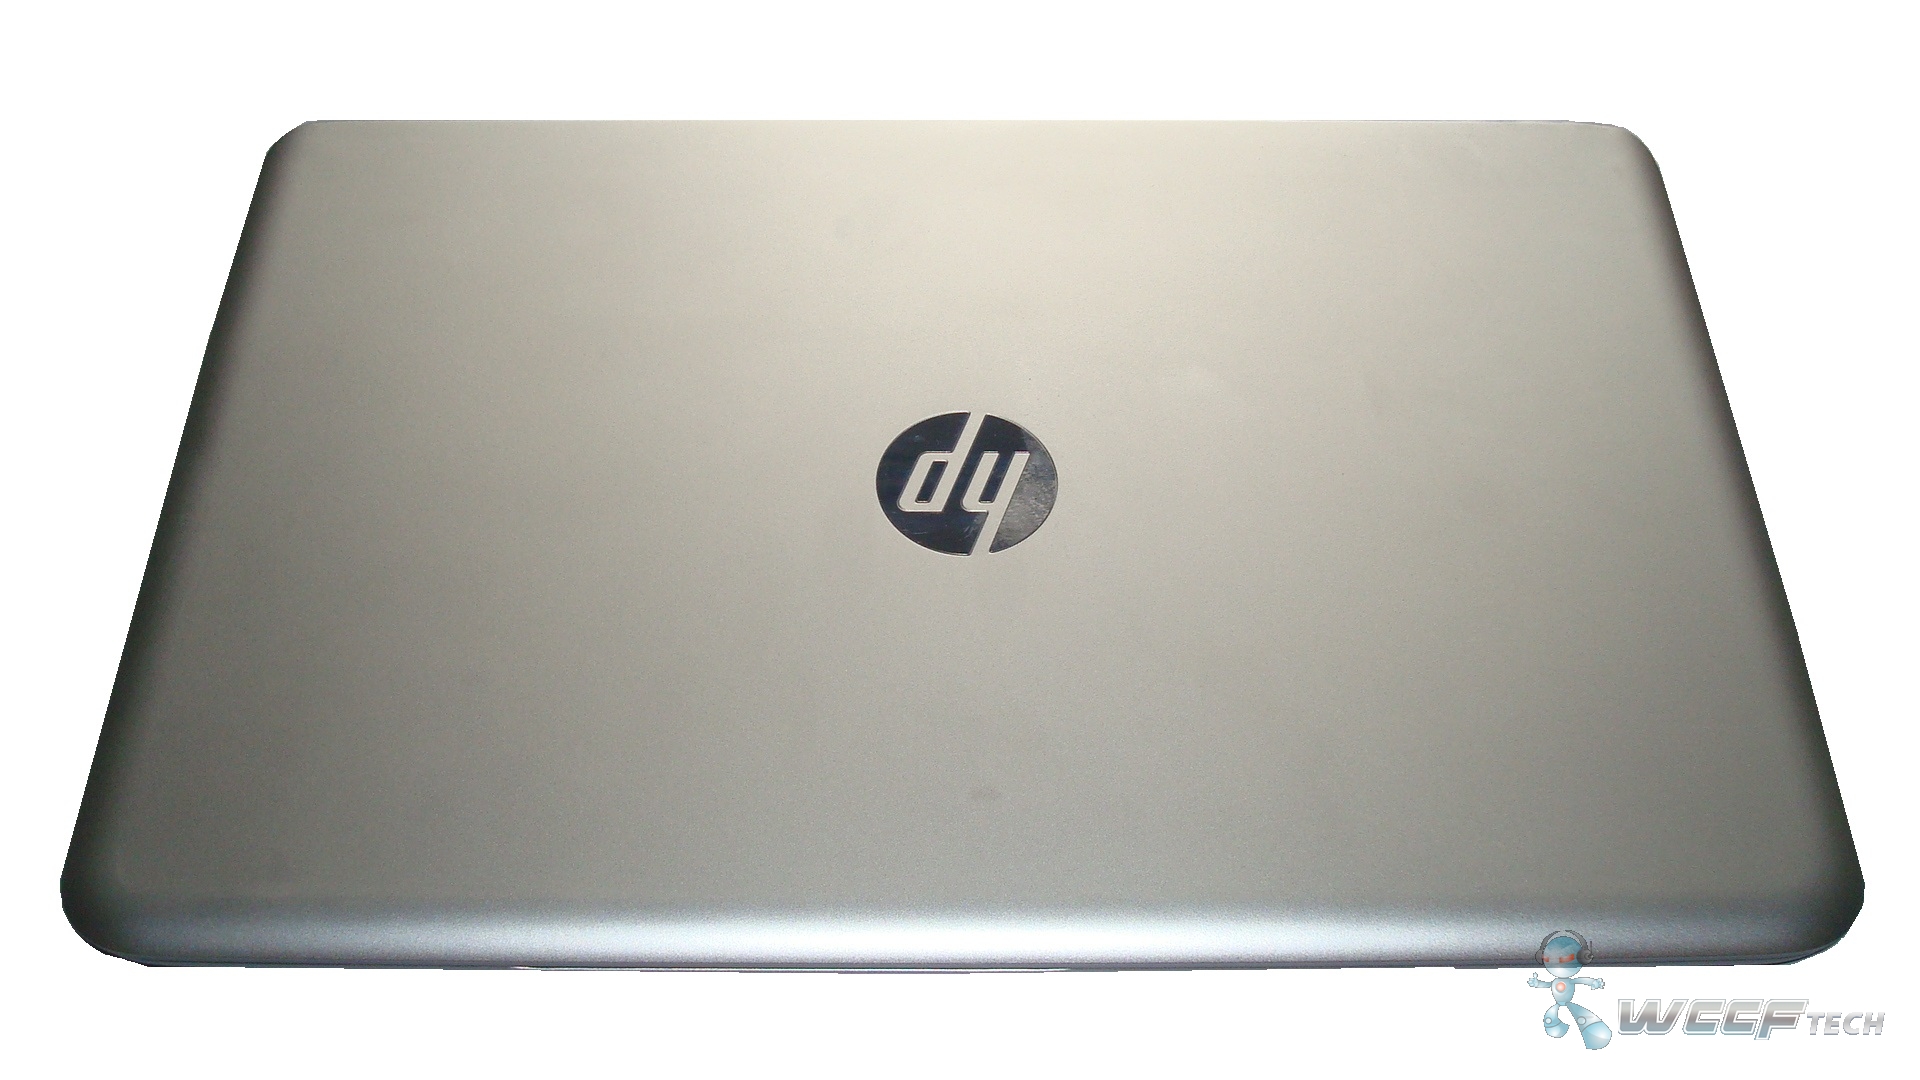 HP Envy TouchSmart j000 Haswell Notebook Review